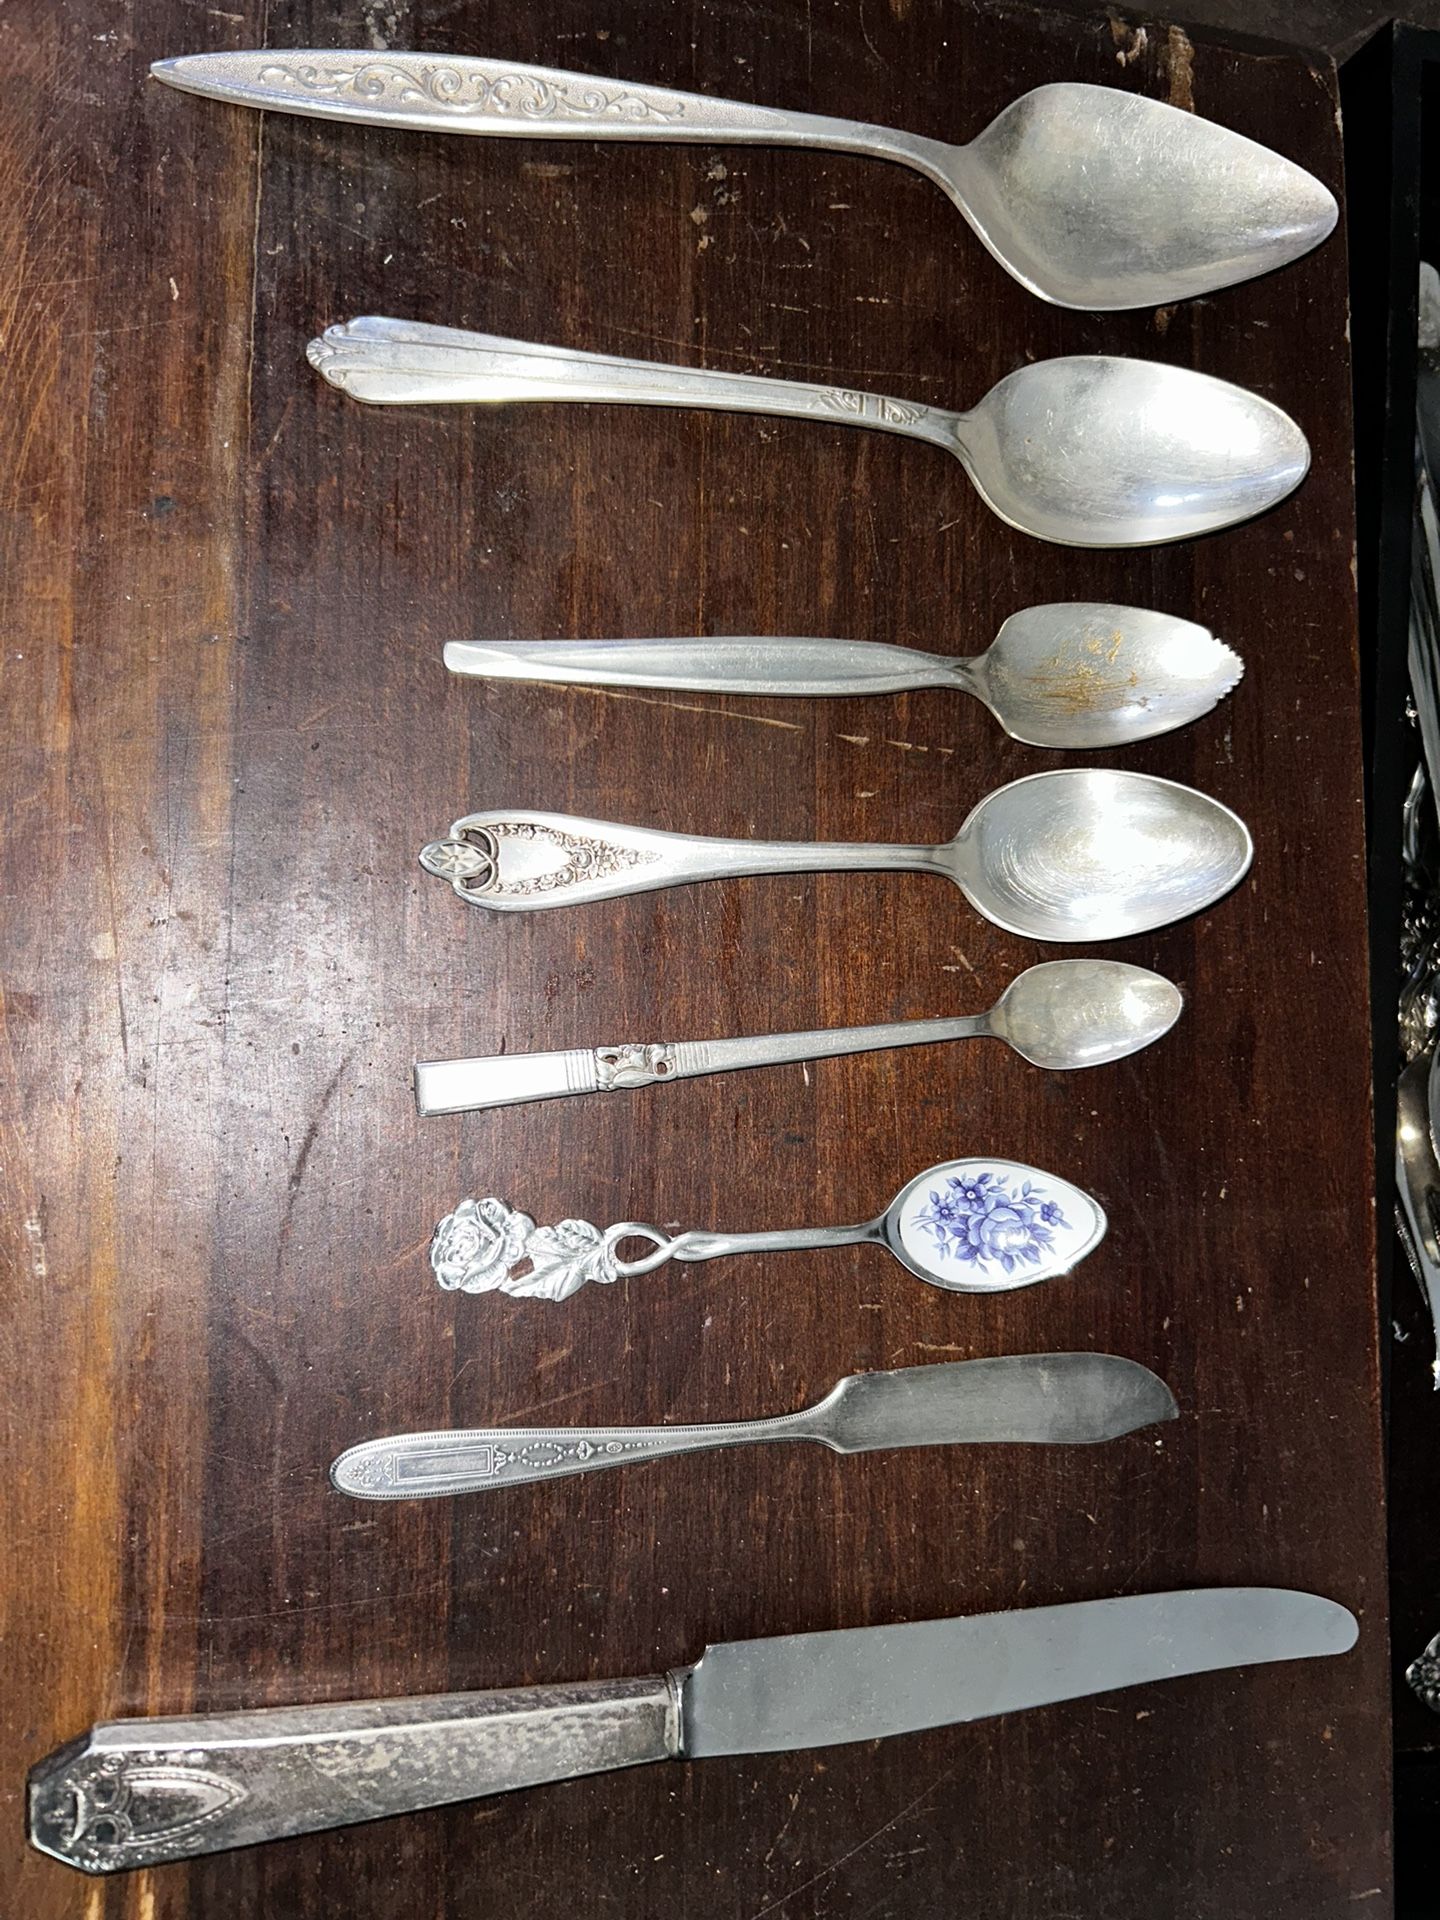 Little Collection Of Neat Little Vintage/Antique Silverware I’ve Gathered Up:)